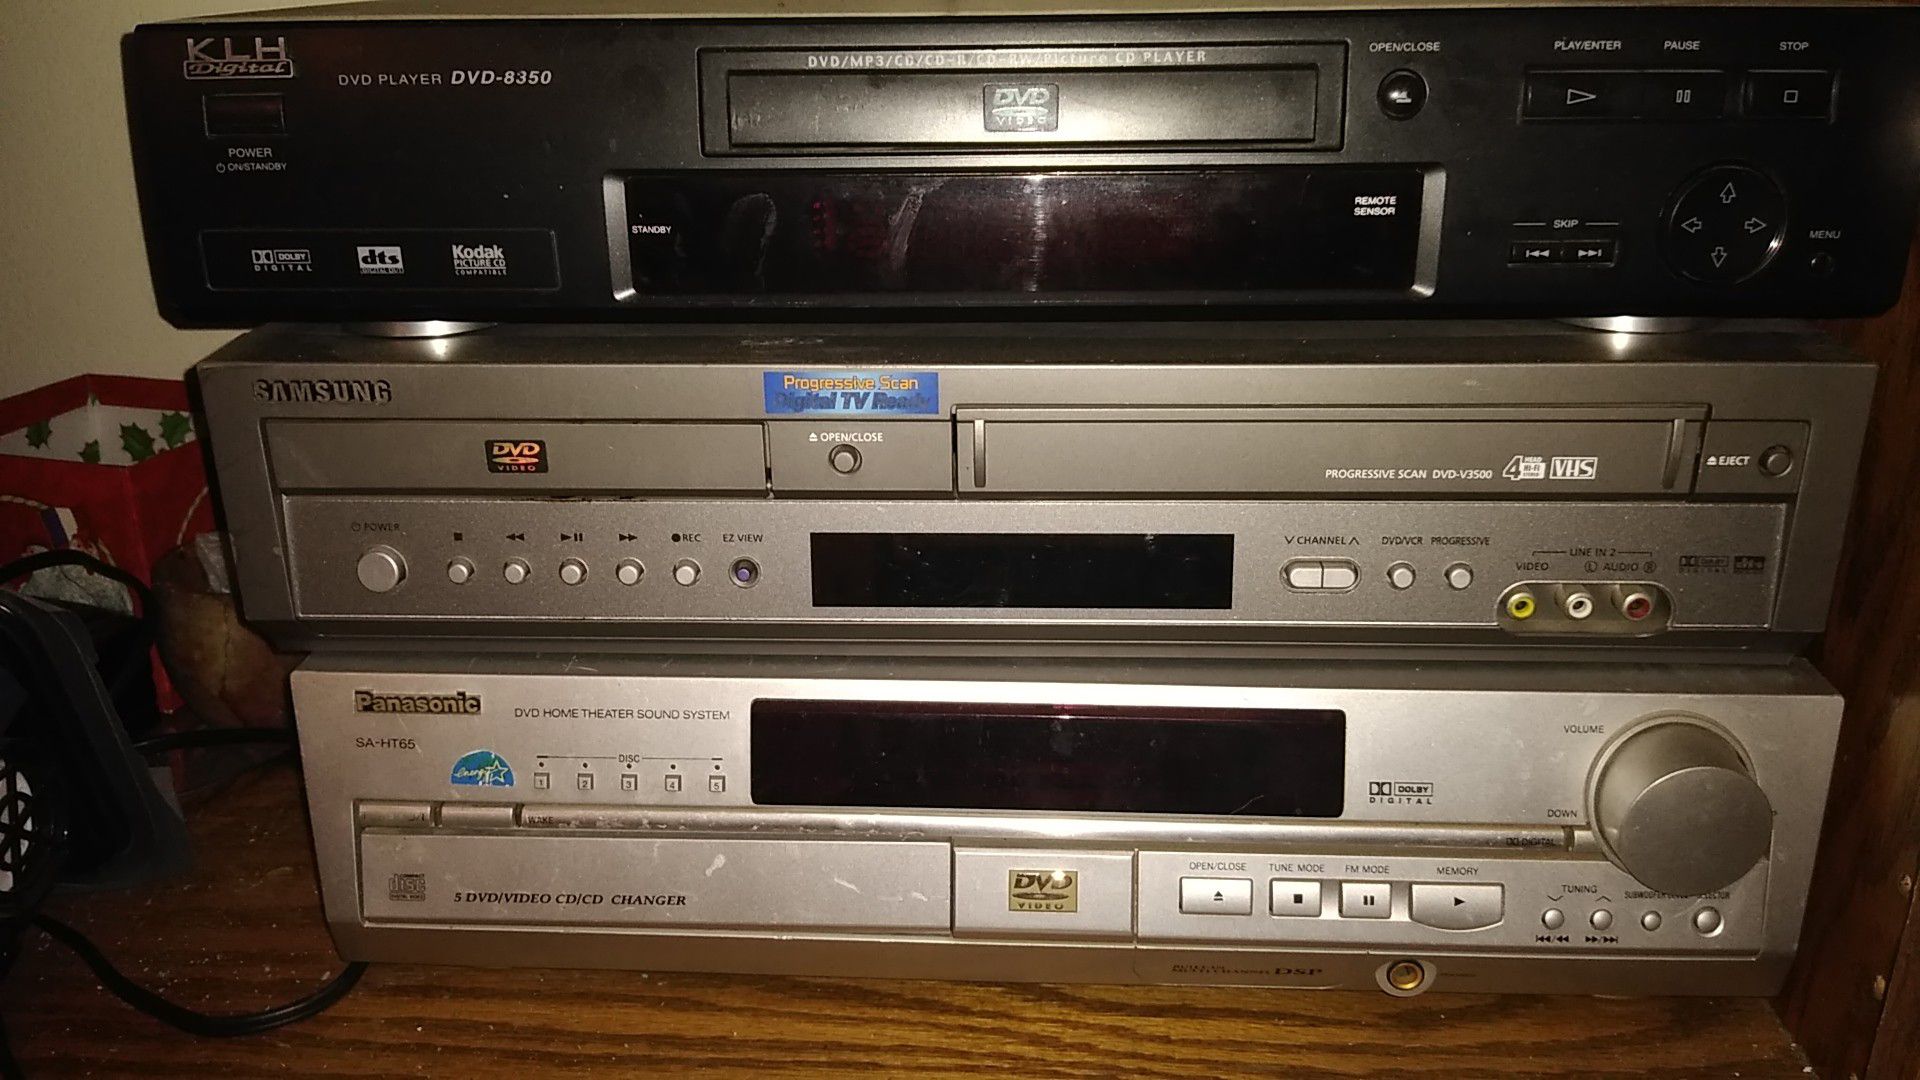 KLH, SAMSUNG, PANASONIC DVD PLAYERS 1 IS VHS/DVD,1 IS 5 DISC CHANGER,1 IS DVD,MP3,CD,CD-R,CD-RW,CD-PICTURE all in working order,good condition as is